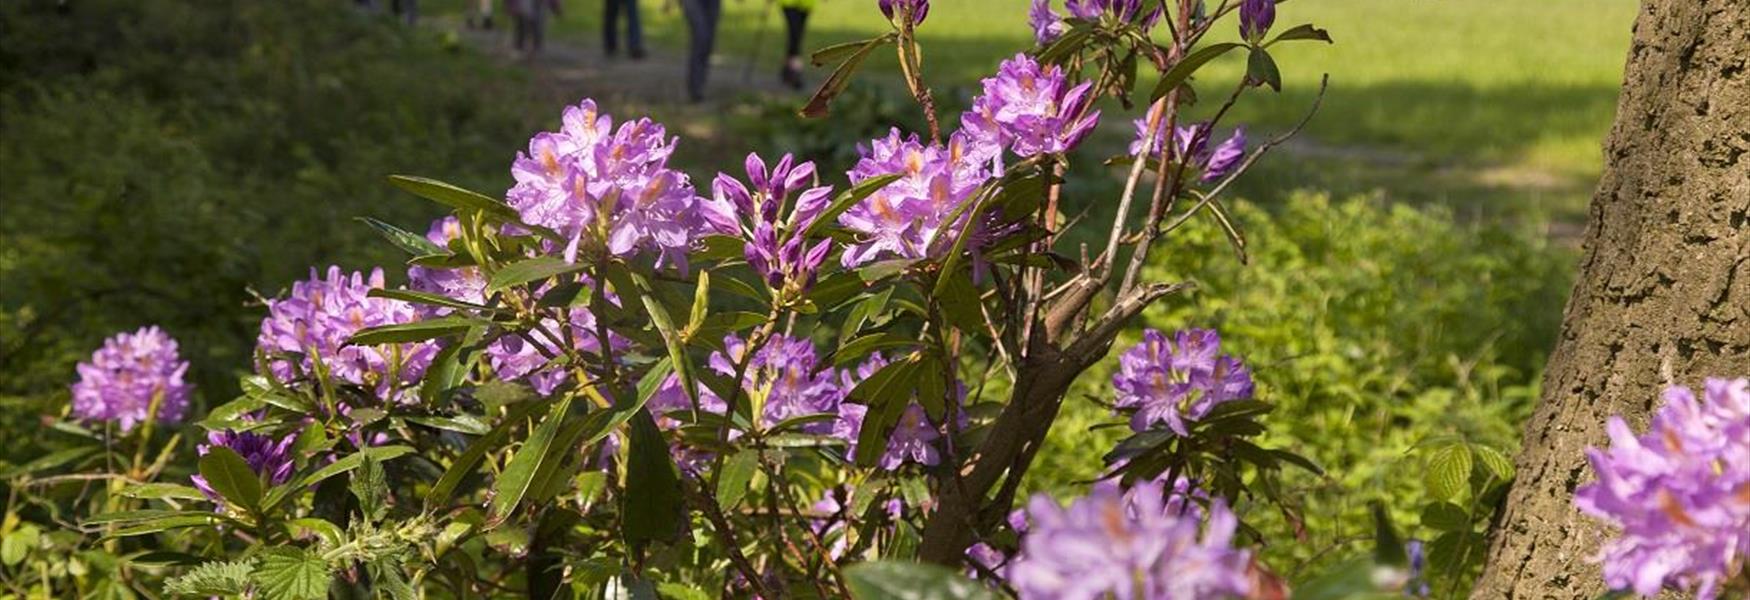 Walkers in the background with a flowering rhododendron in the foreground